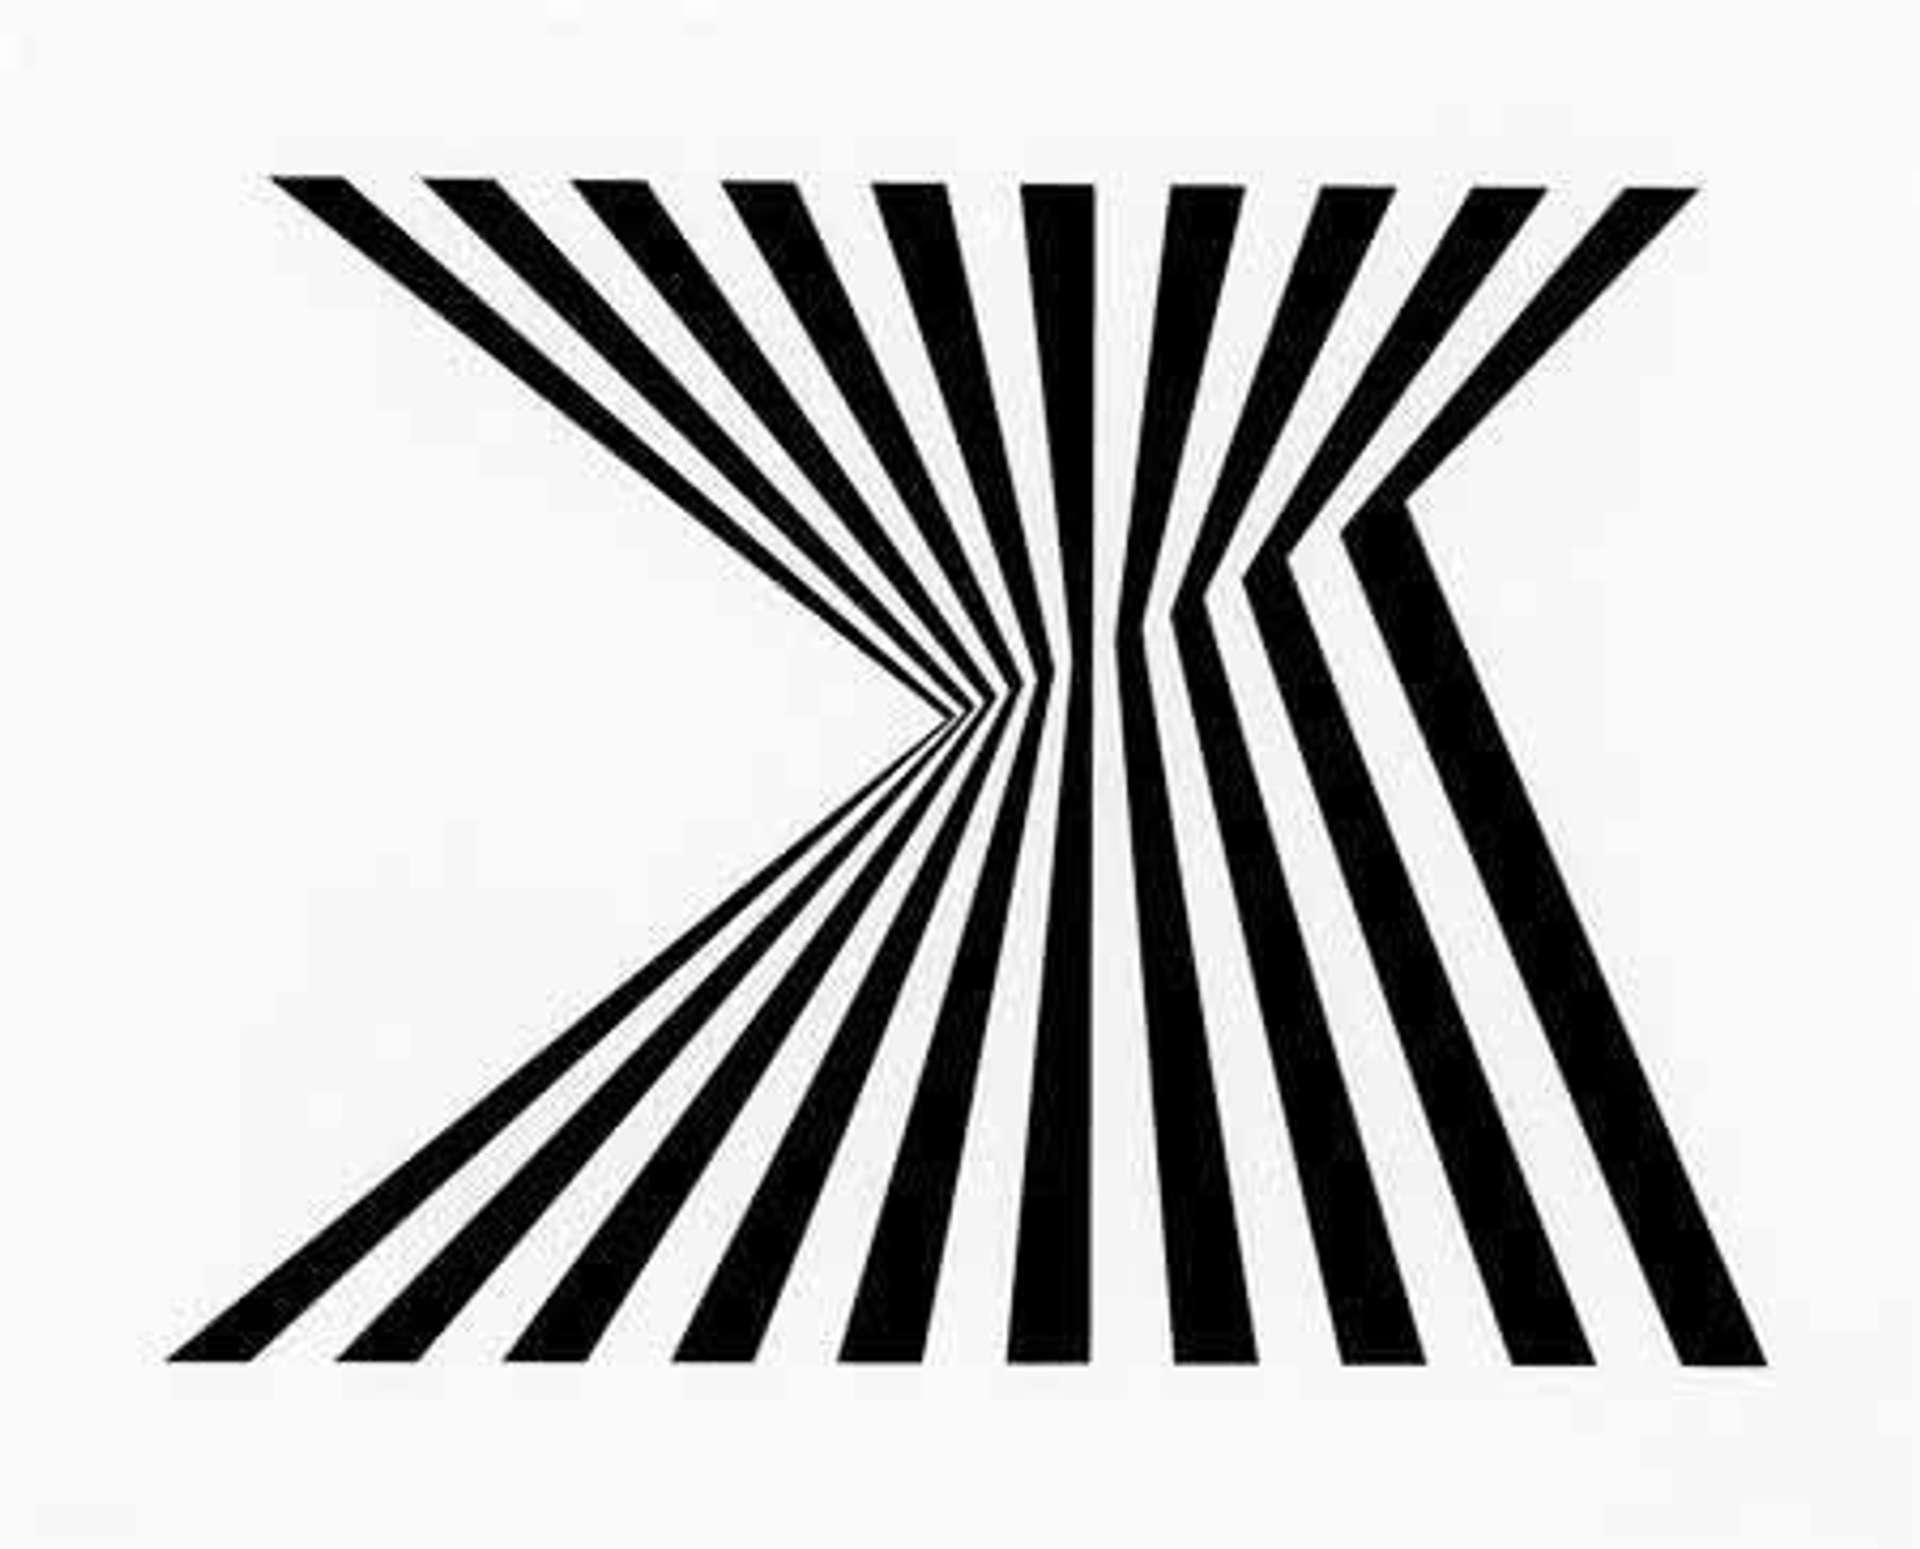 Vertical black lines with indentions of white space, depicting an optical illusion.